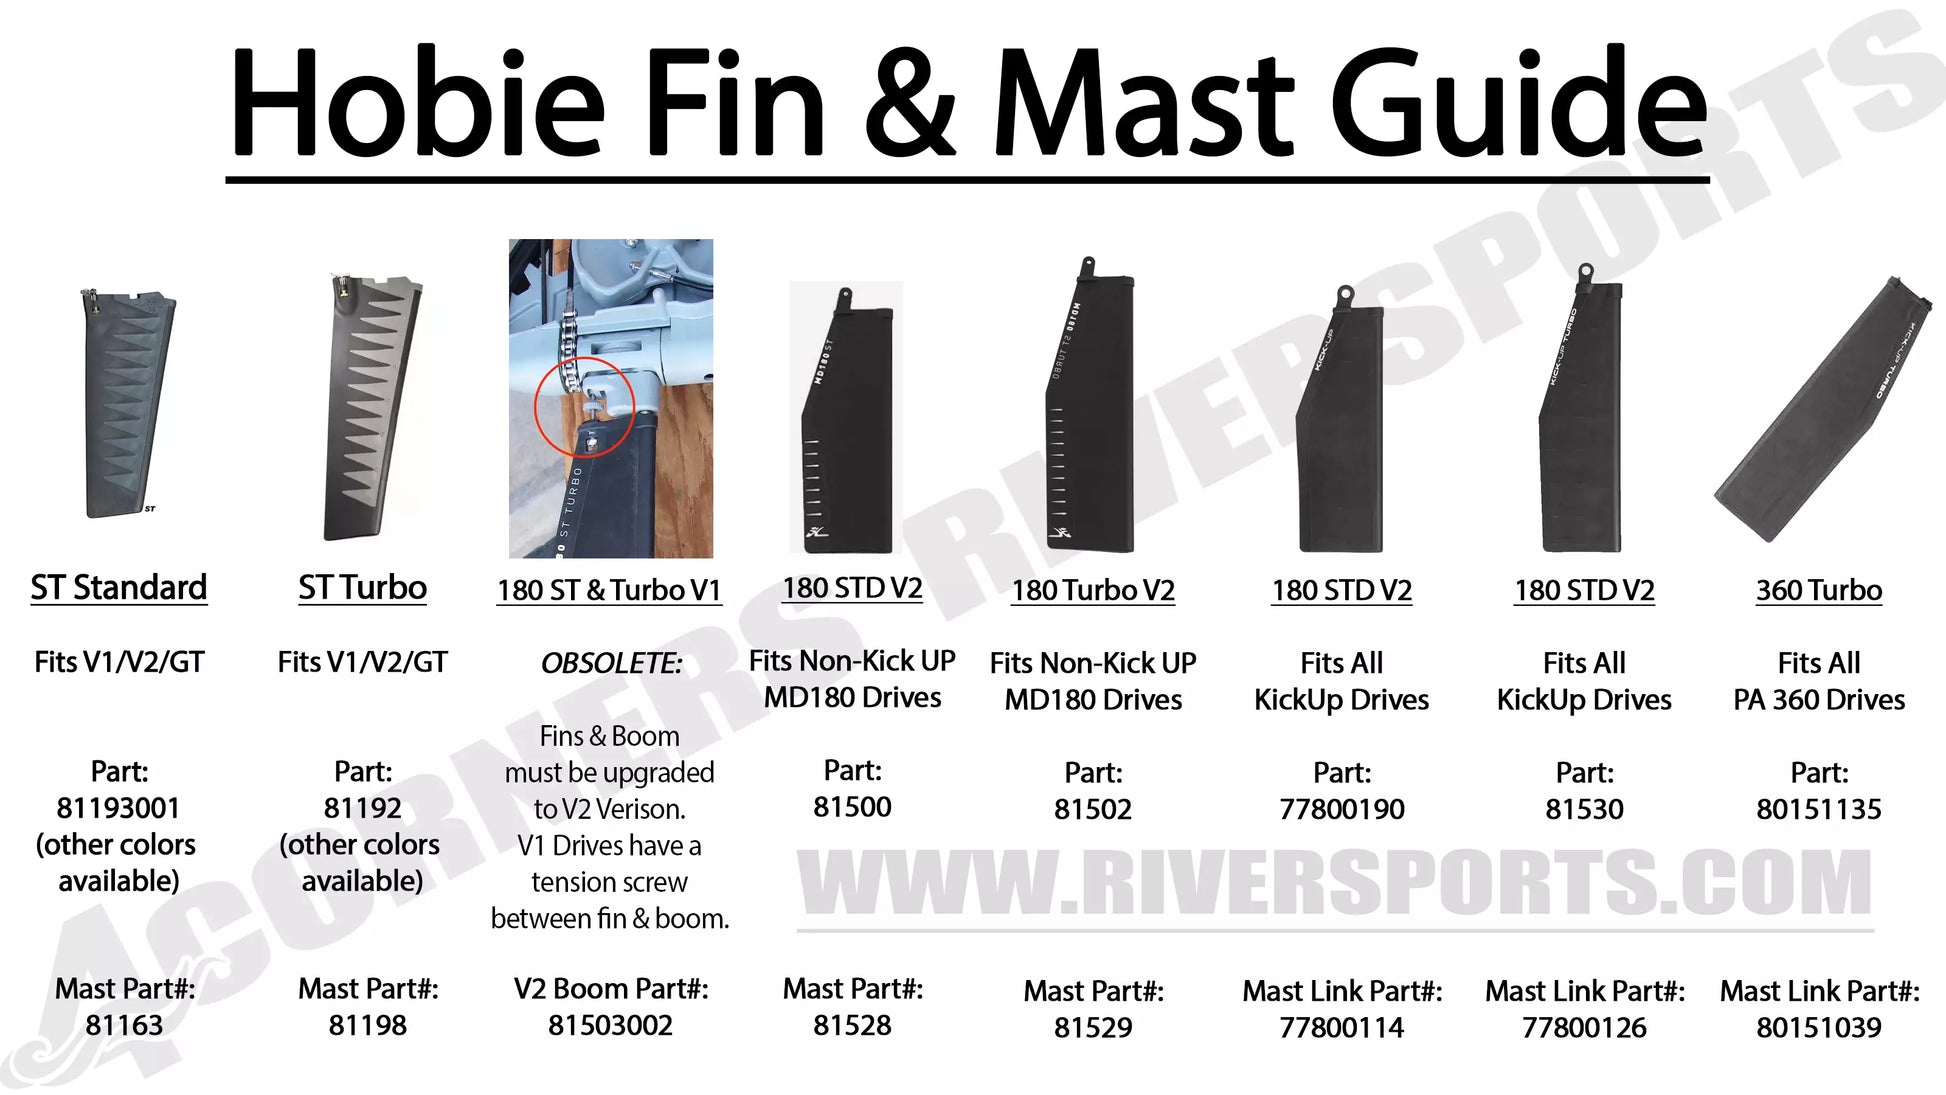 Hobie ST Turbo fin and mast guide